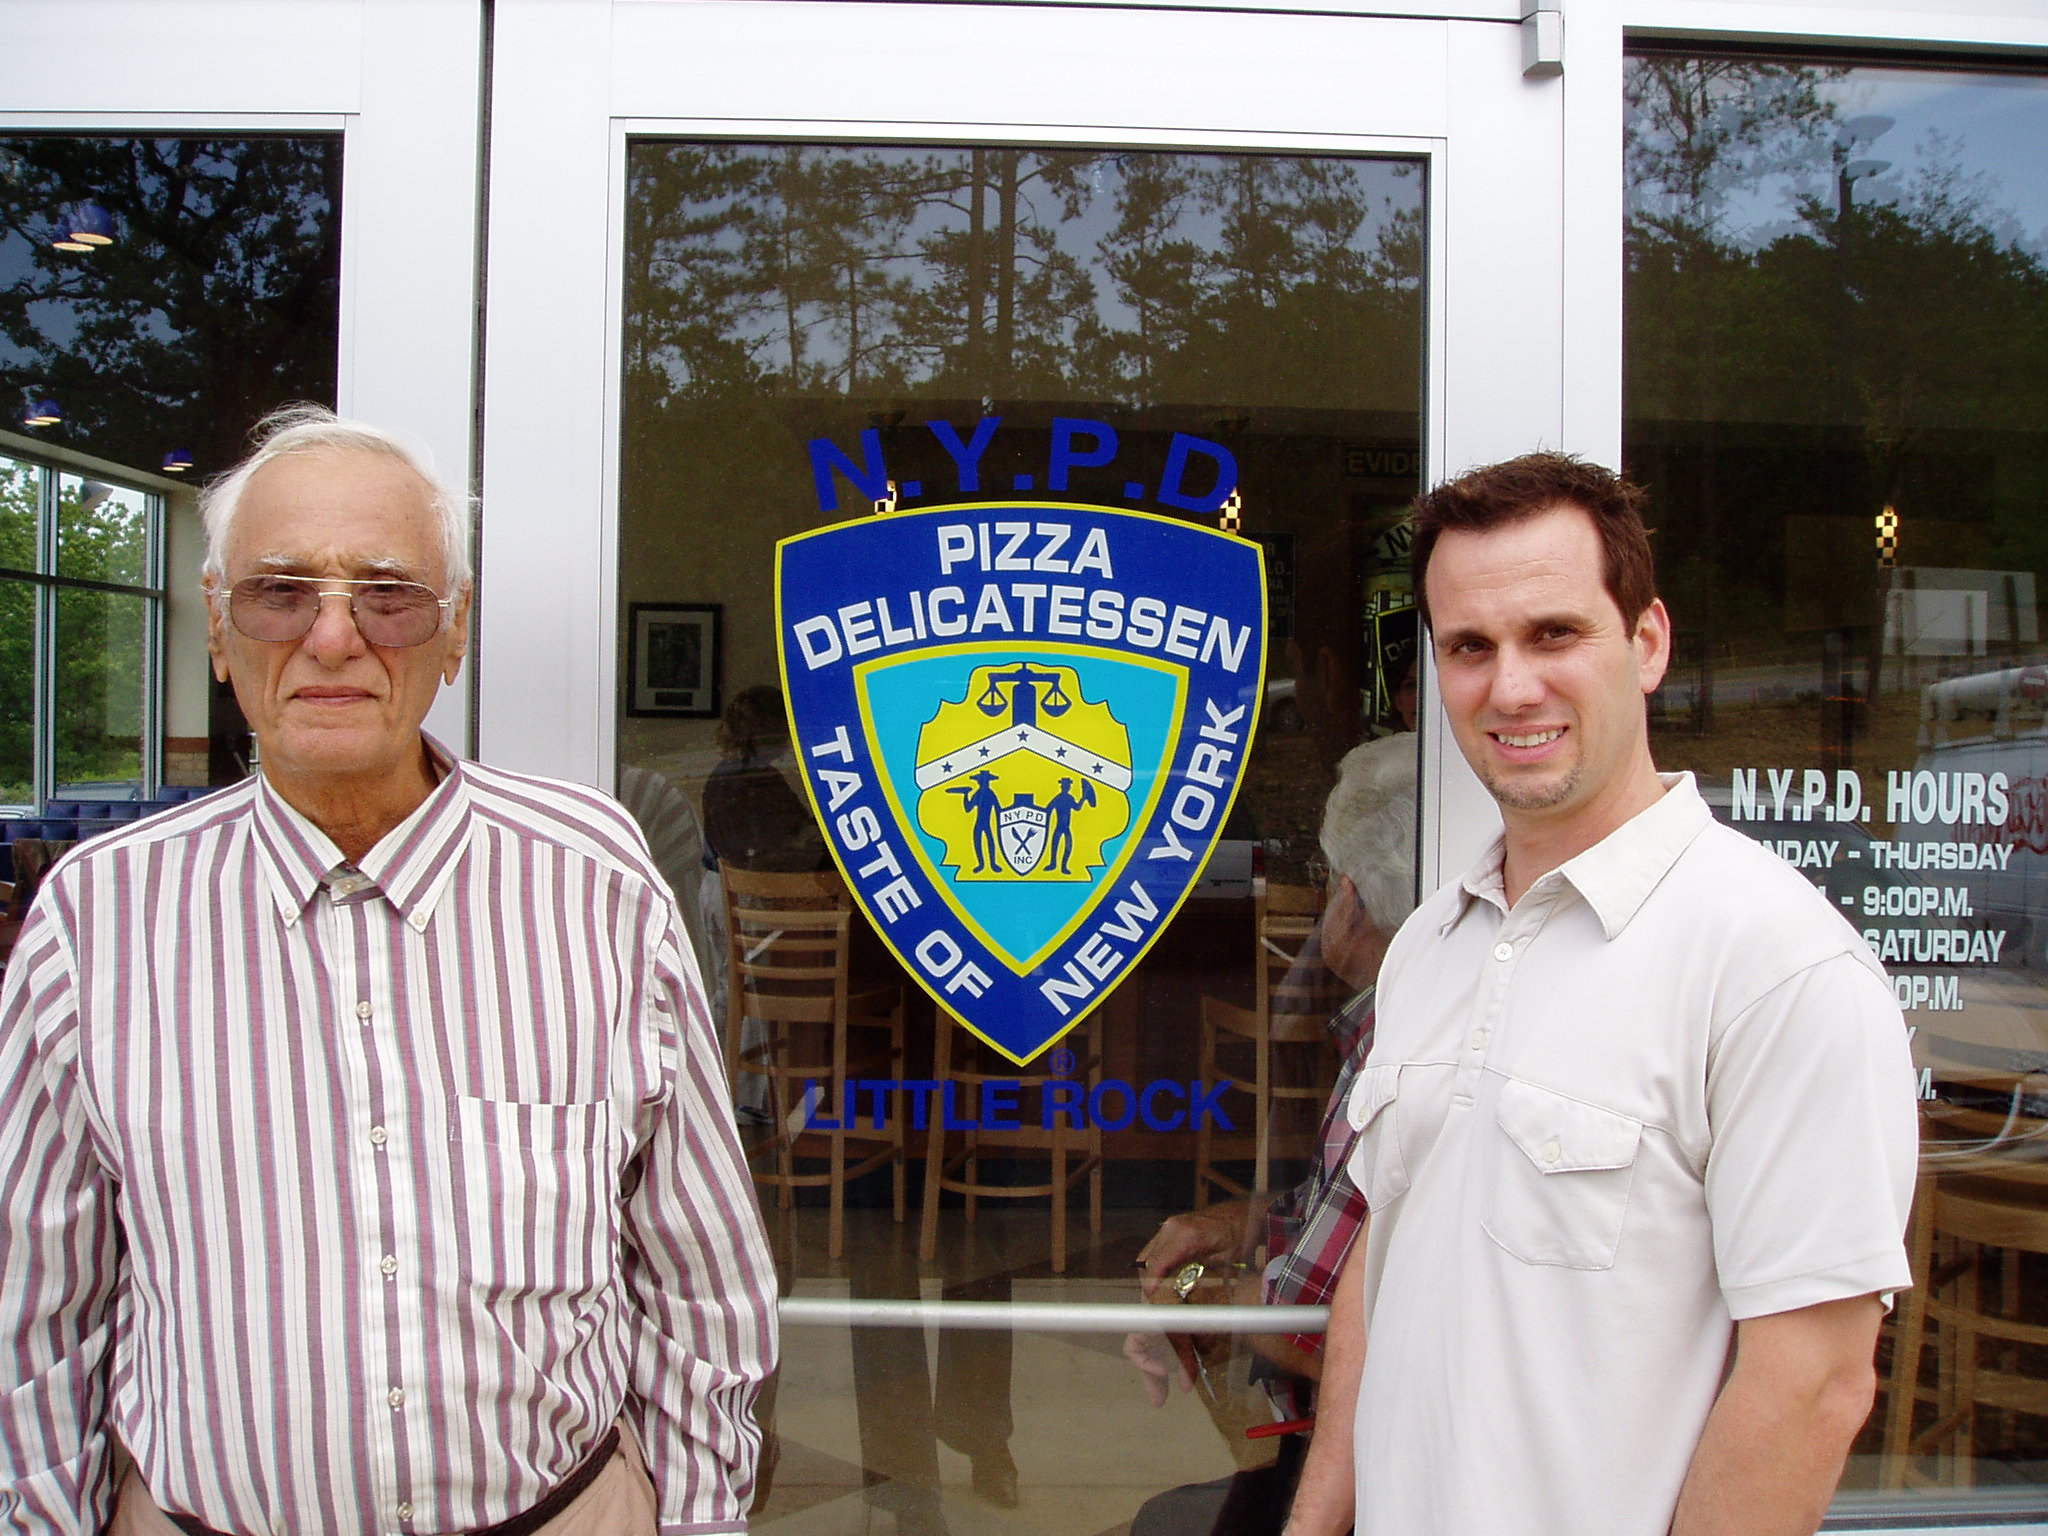 Image of NYPD Pizza founder and CEO Paul Russo and his father Mariano Russo outside of the NYPD Pizza Little Rock location